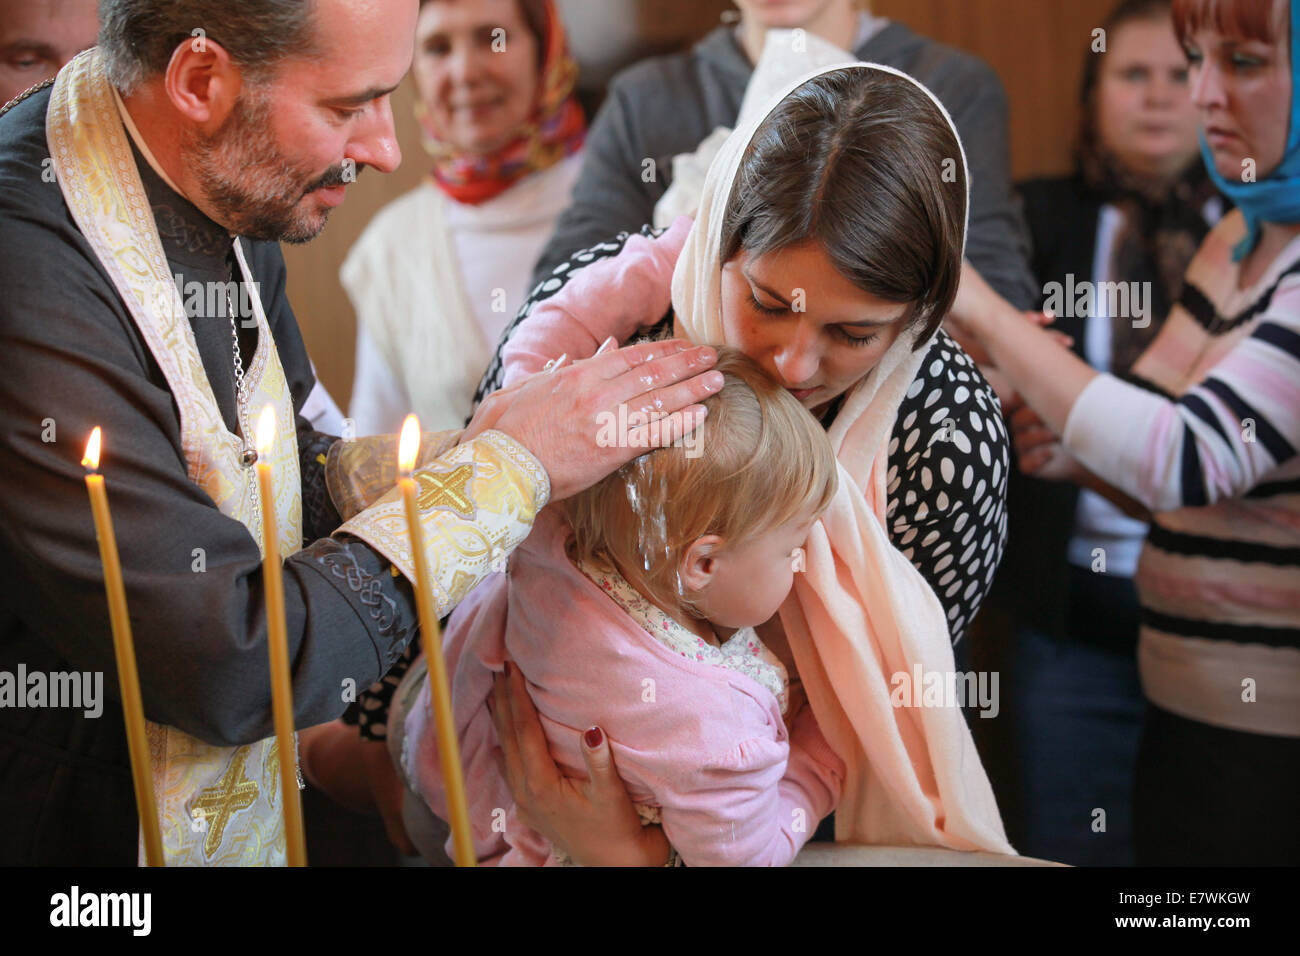 ST.PETERSBURG, RUSSIA - SEPTEMBER 21, 2014: Orthodox priest performs the rite of baptism for a little Russian girl Stock Photo